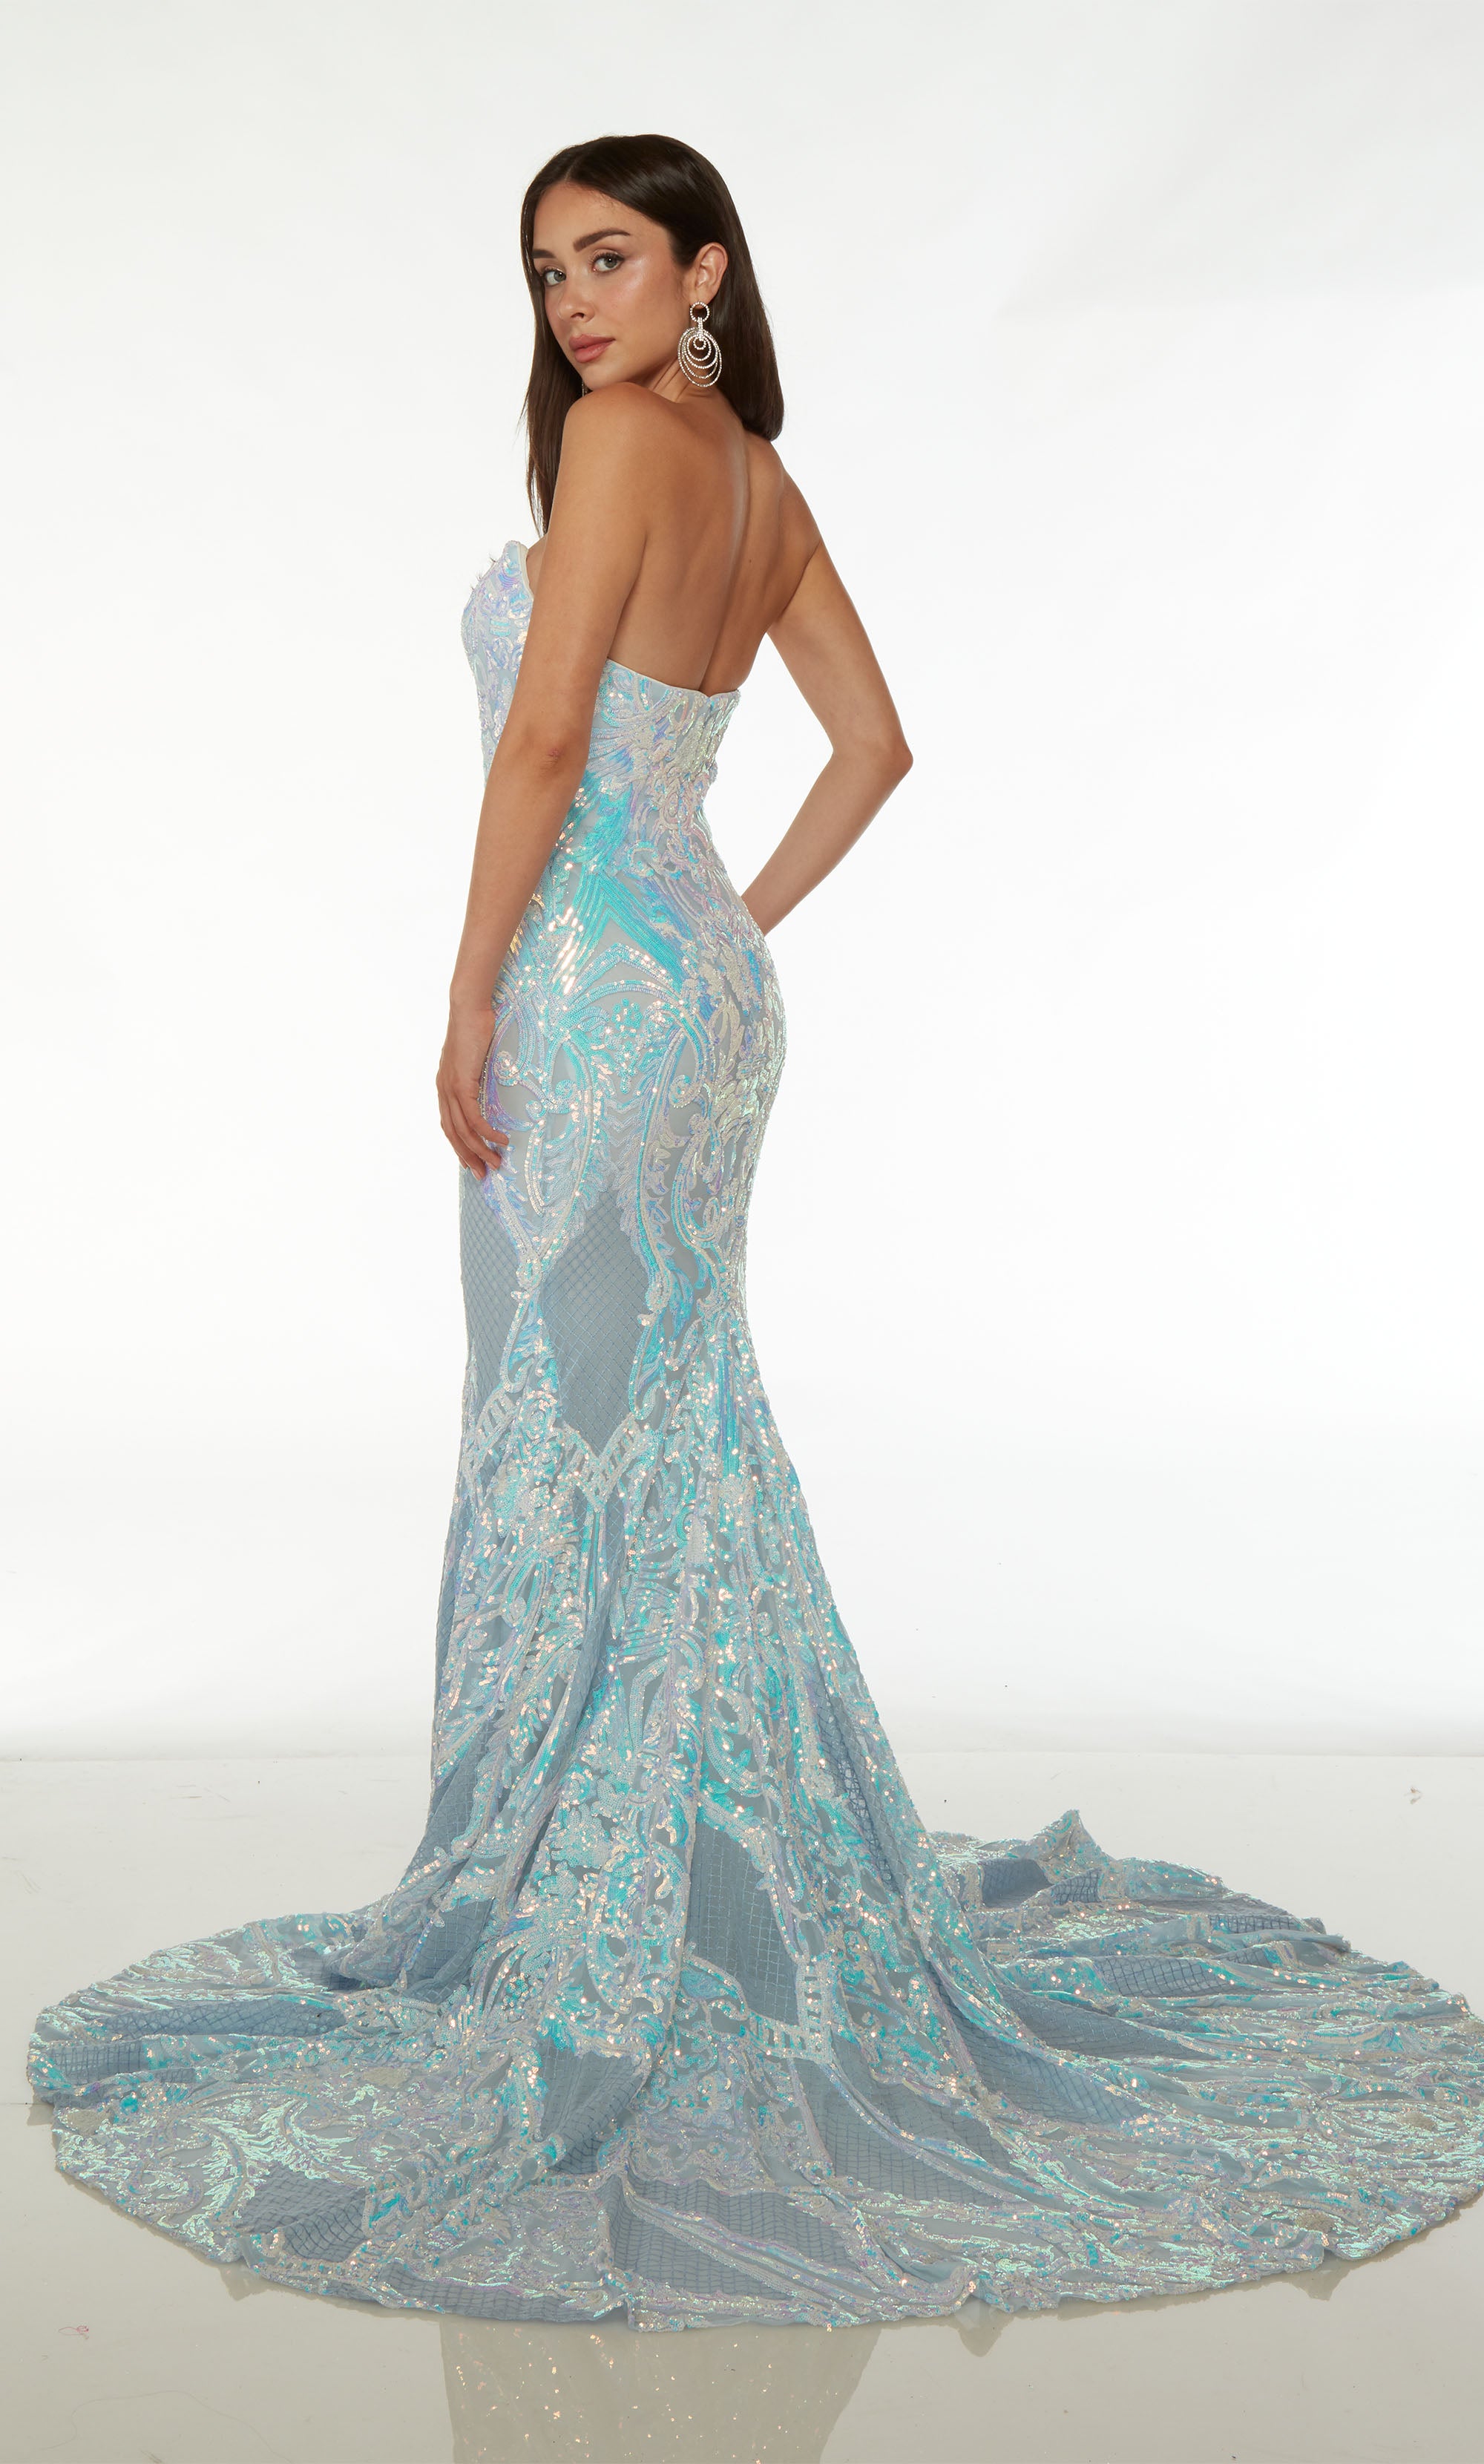 Opulent opal-blue strapless formal dress with an fit-and-flare silhouette, intricate paisley-patterned iridescent sequins, an zip-up back, and an graceful train.